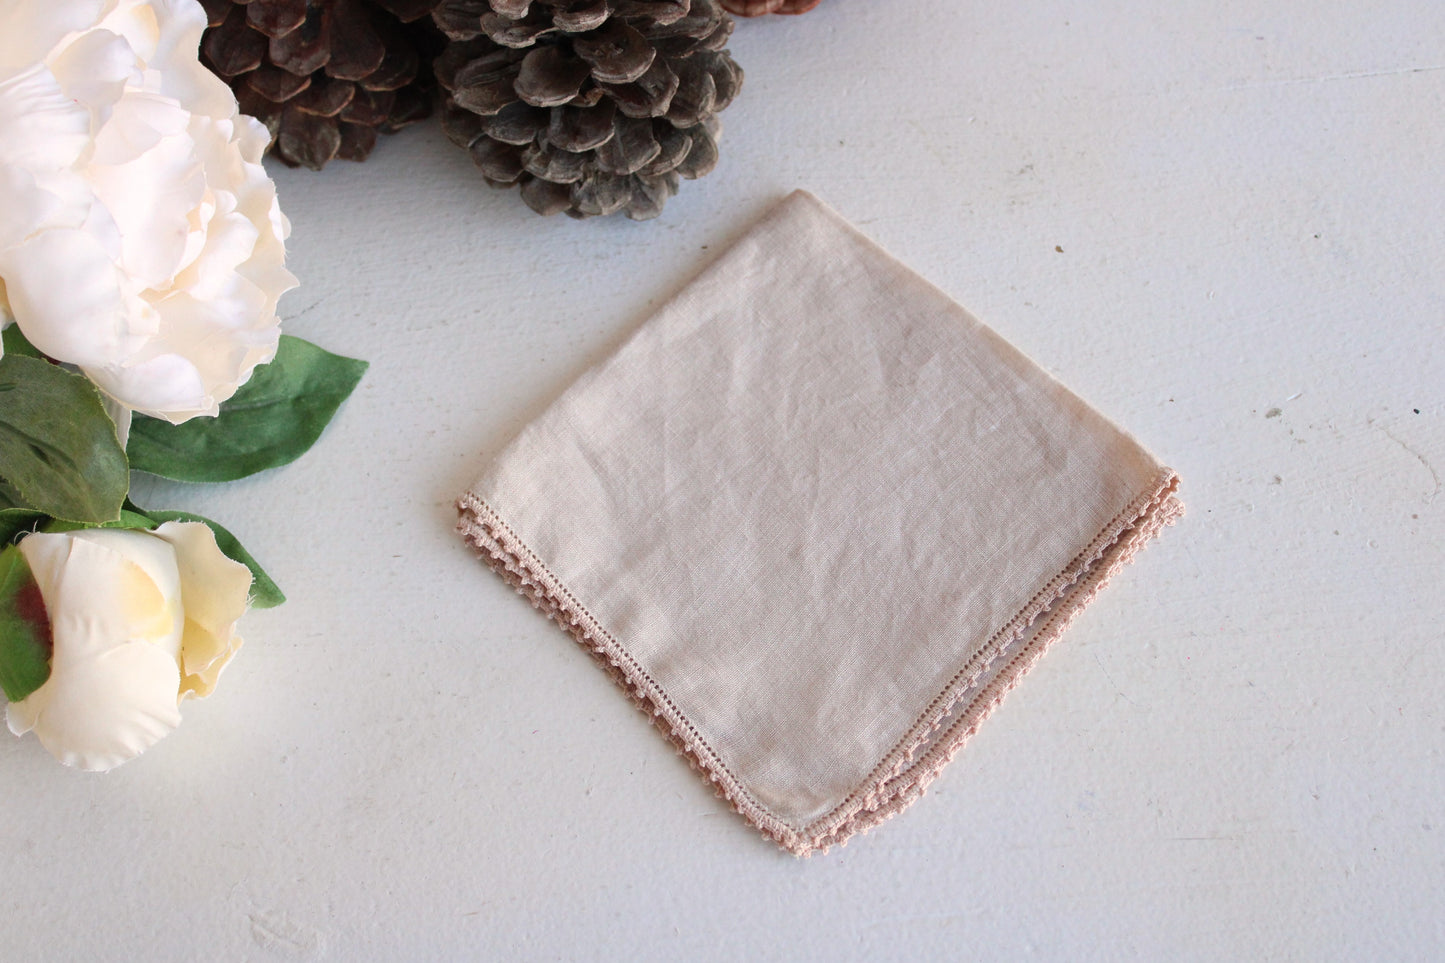 "Dried Rose" Hand Plant Dyed Vintage Handkerchief in Mottled Dusty Pink